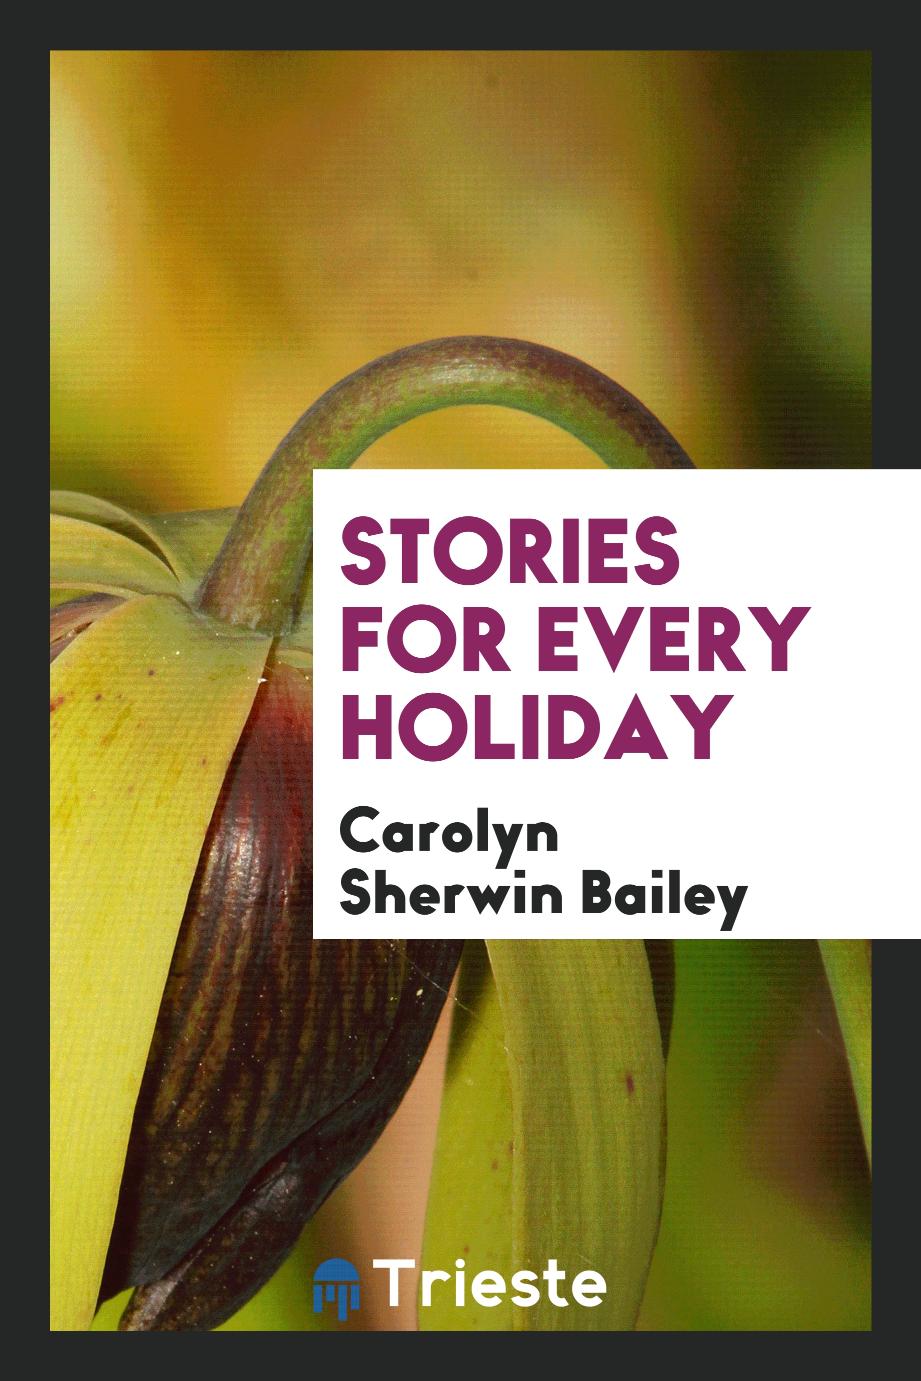 Stories for every holiday